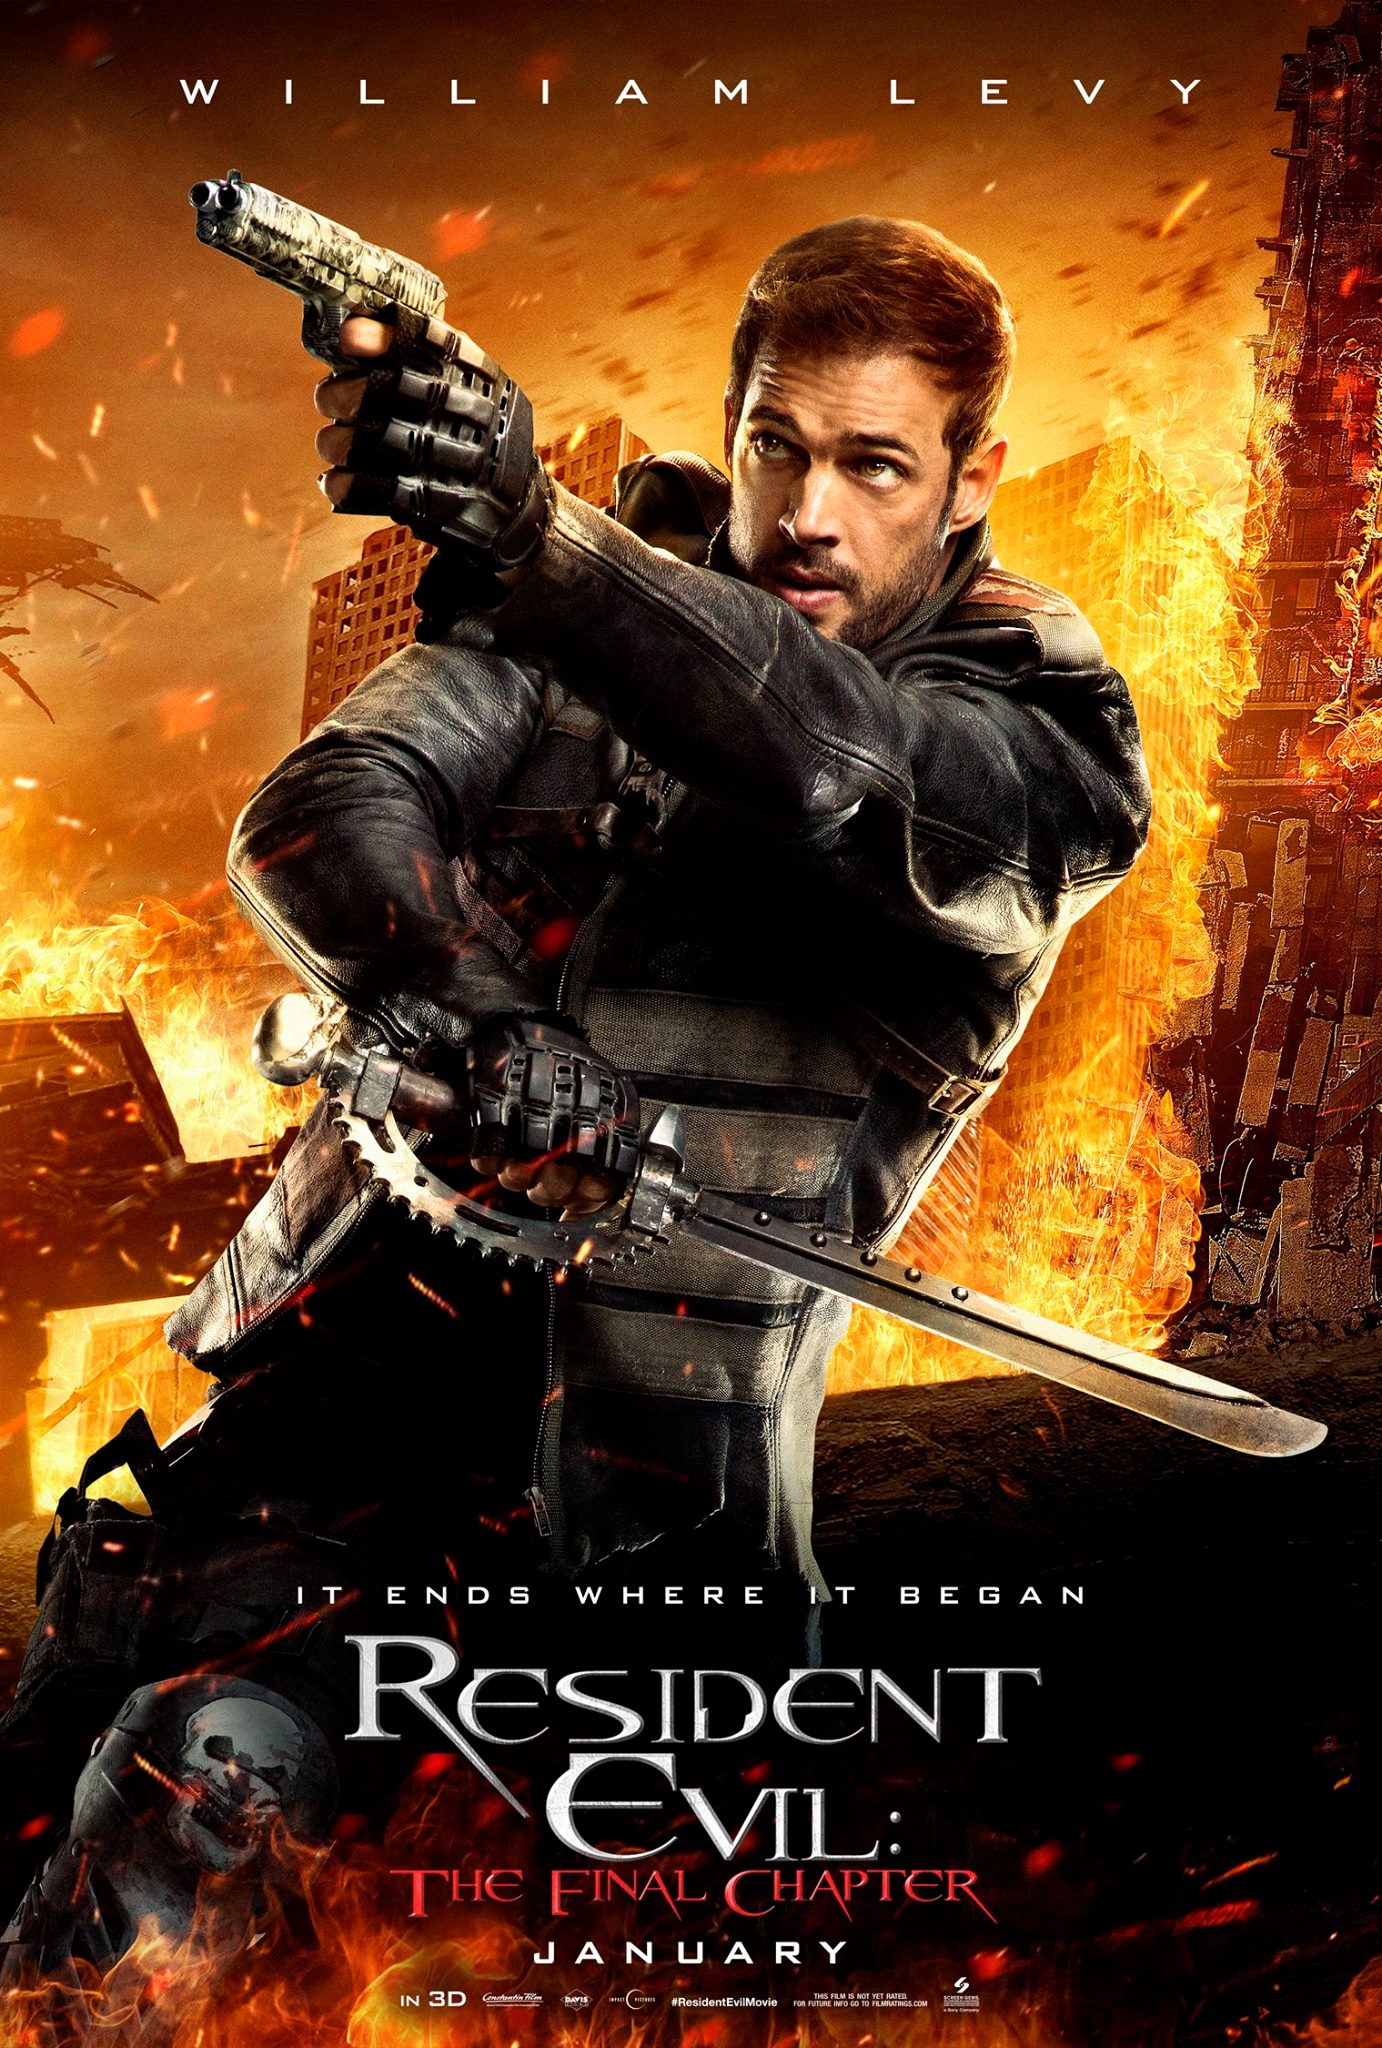 Resident Evil: The Final Chapter #1